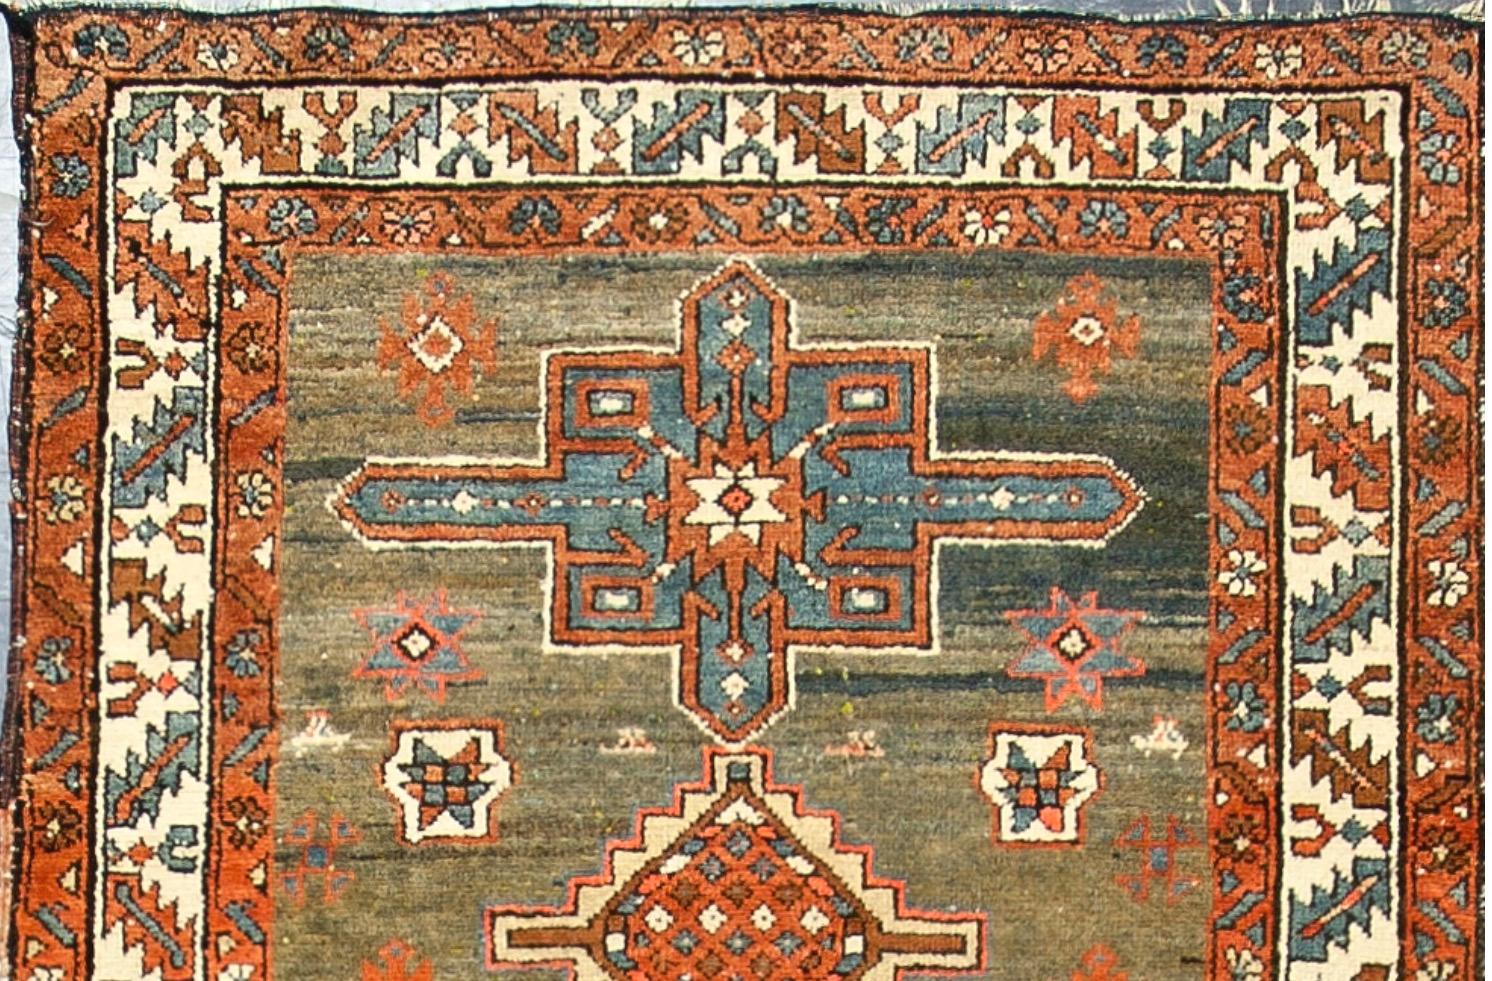 Across the Aras river from Karajeh is the Armenian Caucasian rug area of Karabagh (Black Garden) which wove scatters, runners and gallery rugs from the 17th century onwards, often with cochineal reds and violets as significant tones. Antique